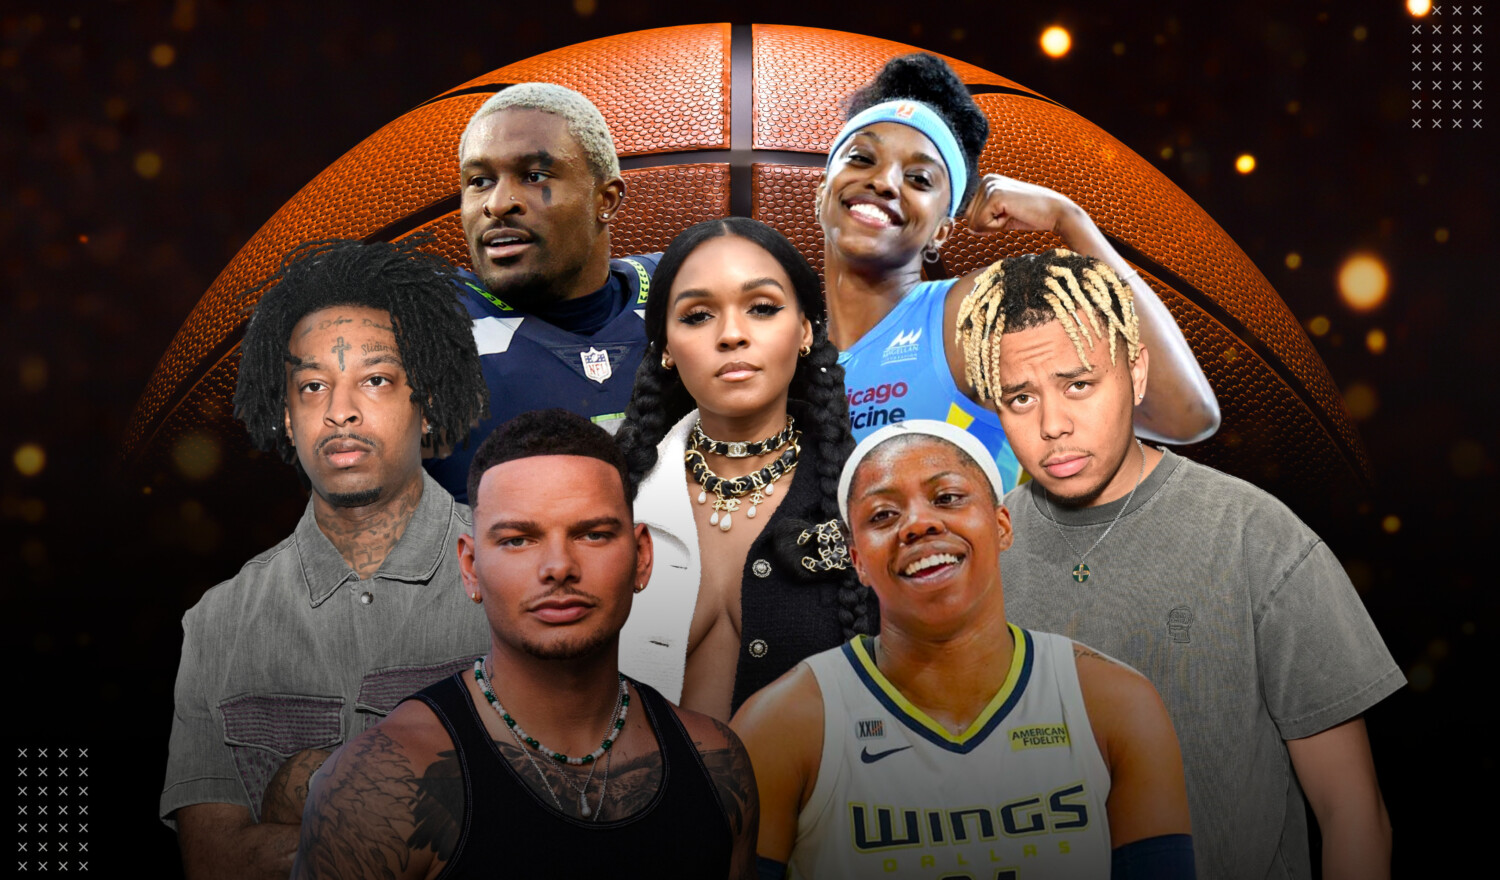 All star celeb game roster